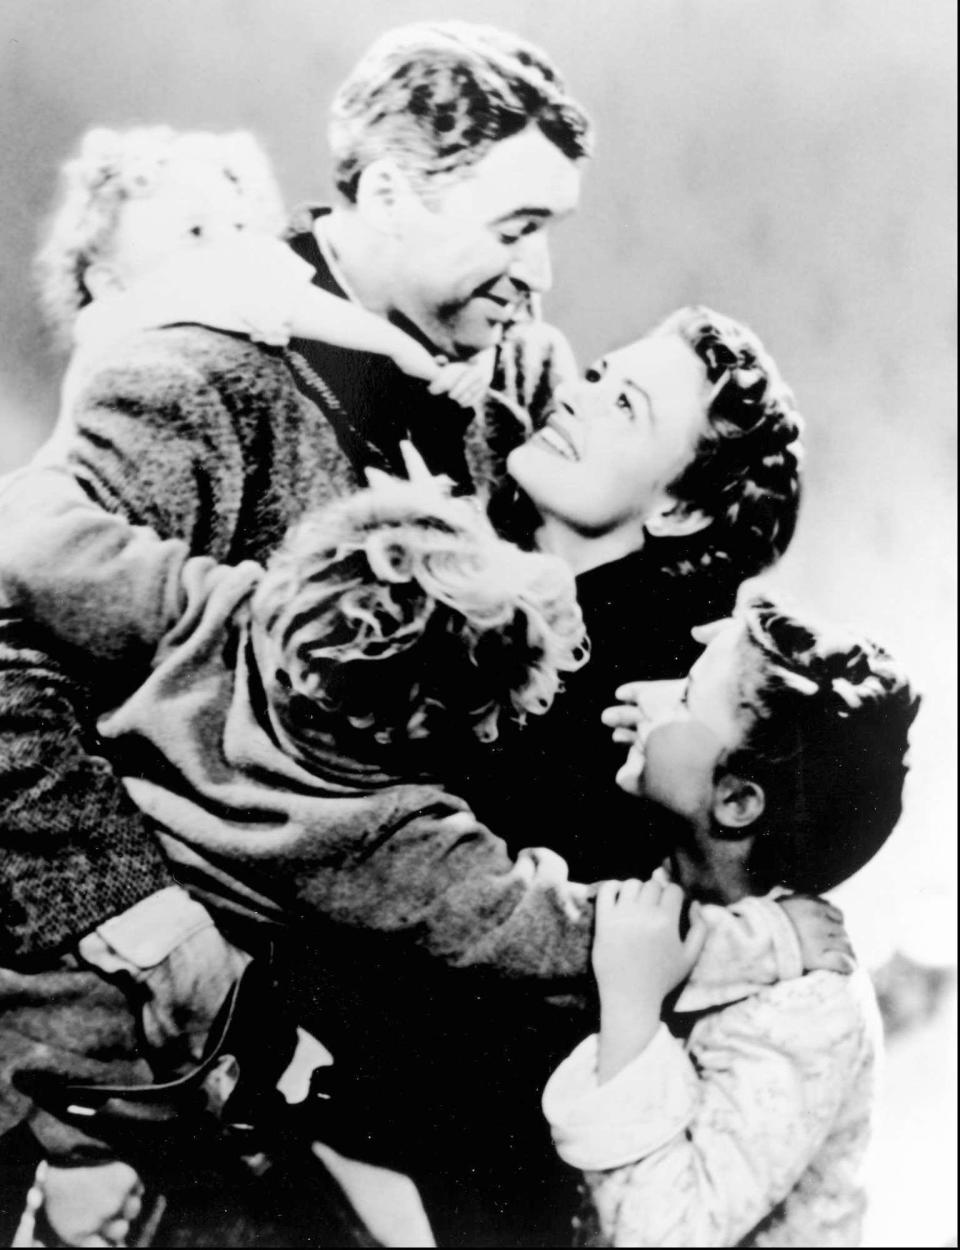 Jimmy Stewart, as George Bailey, is lovingly mauled by the rest of the Baily family in "It's a Wonderful Life.''